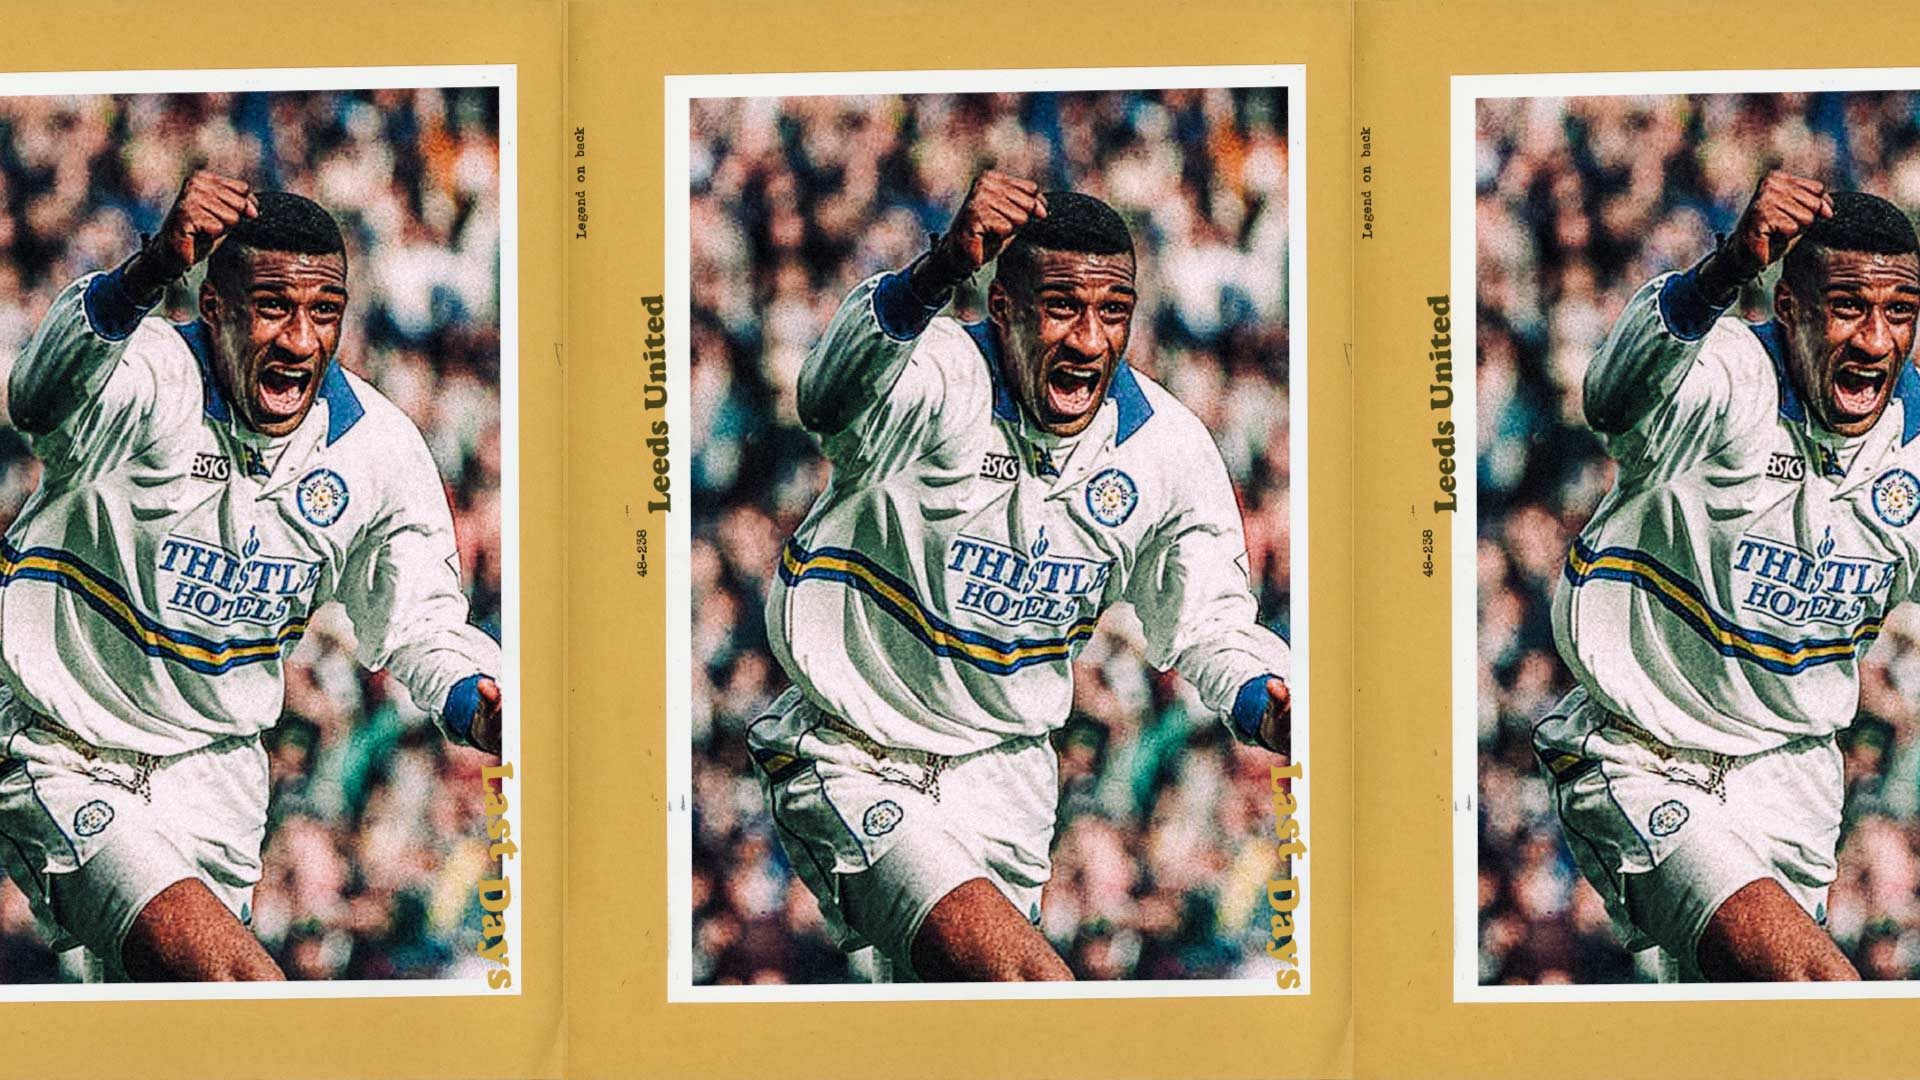 A photo of Brian Deane looking ace as he celebrates scoring for Leeds in 1994